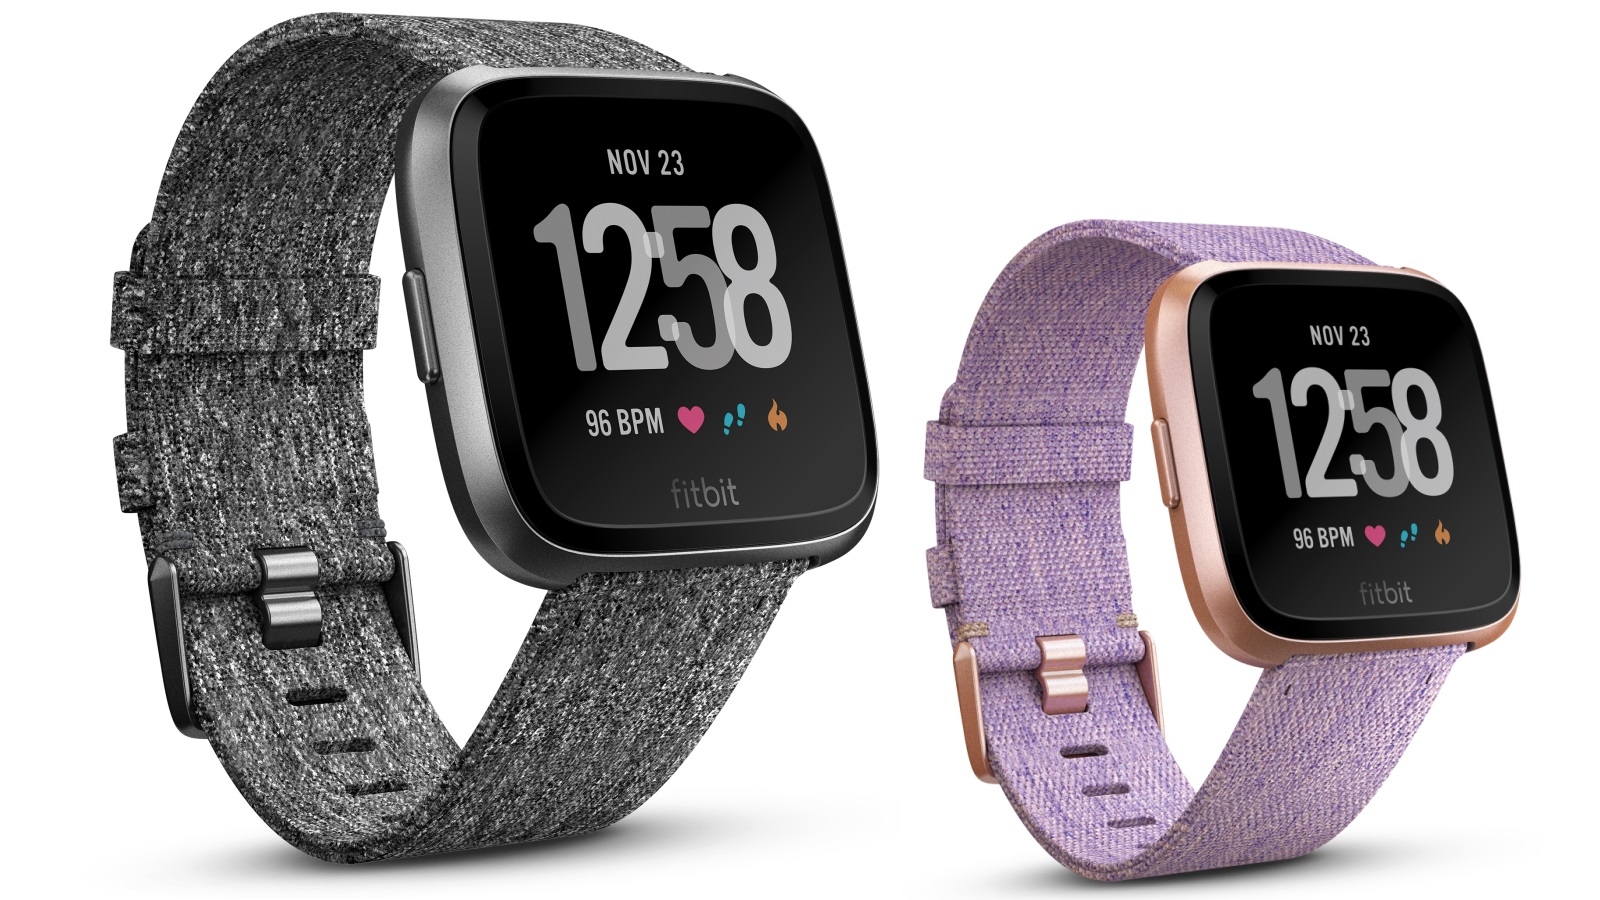 difference between versa and versa special edition